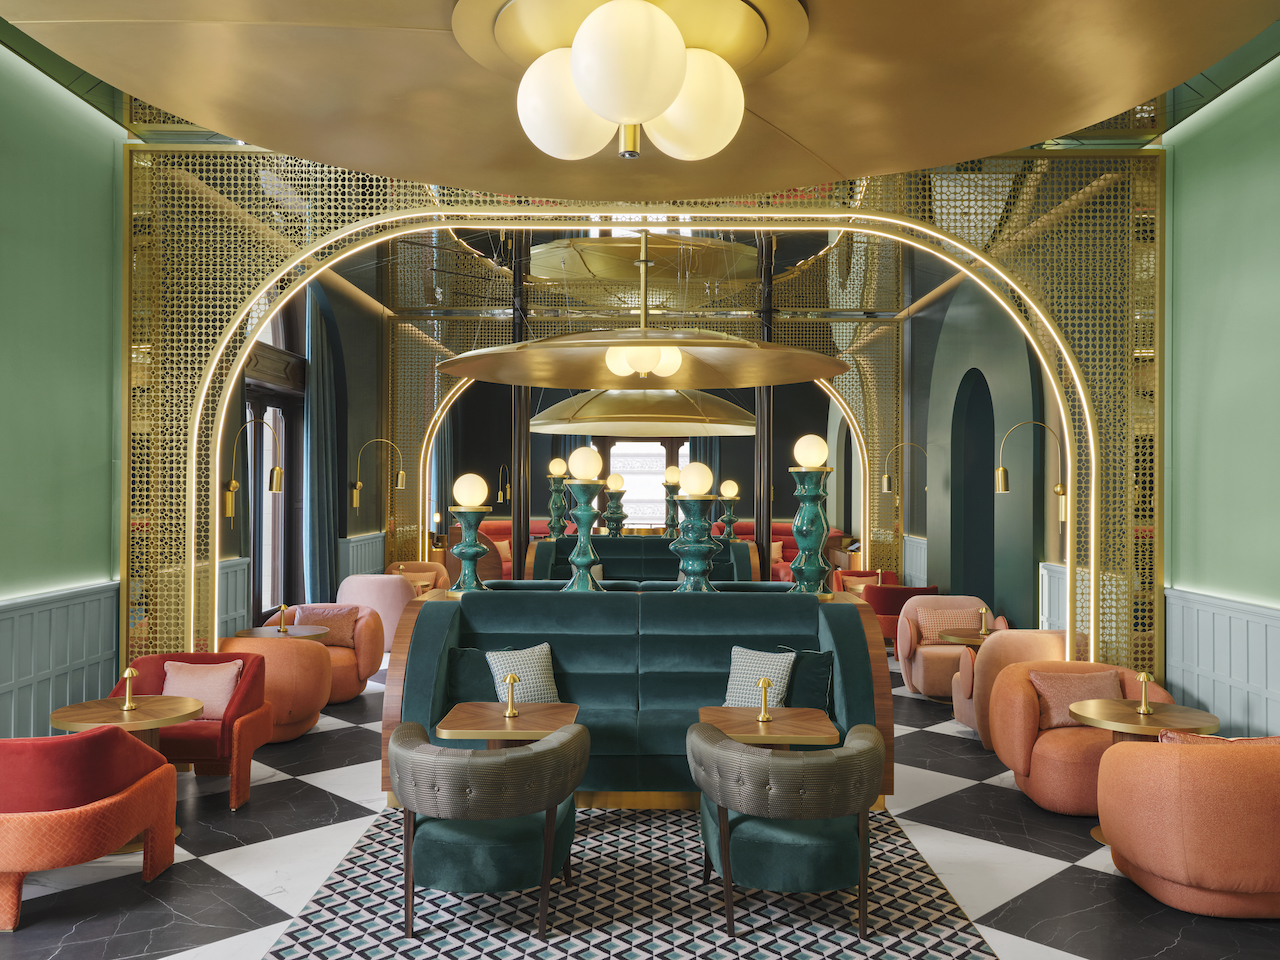 The new W Budapest combines visionary design, eclectic gastronomy and a socially driven spirit drawn from the cosmopolitan capital.  